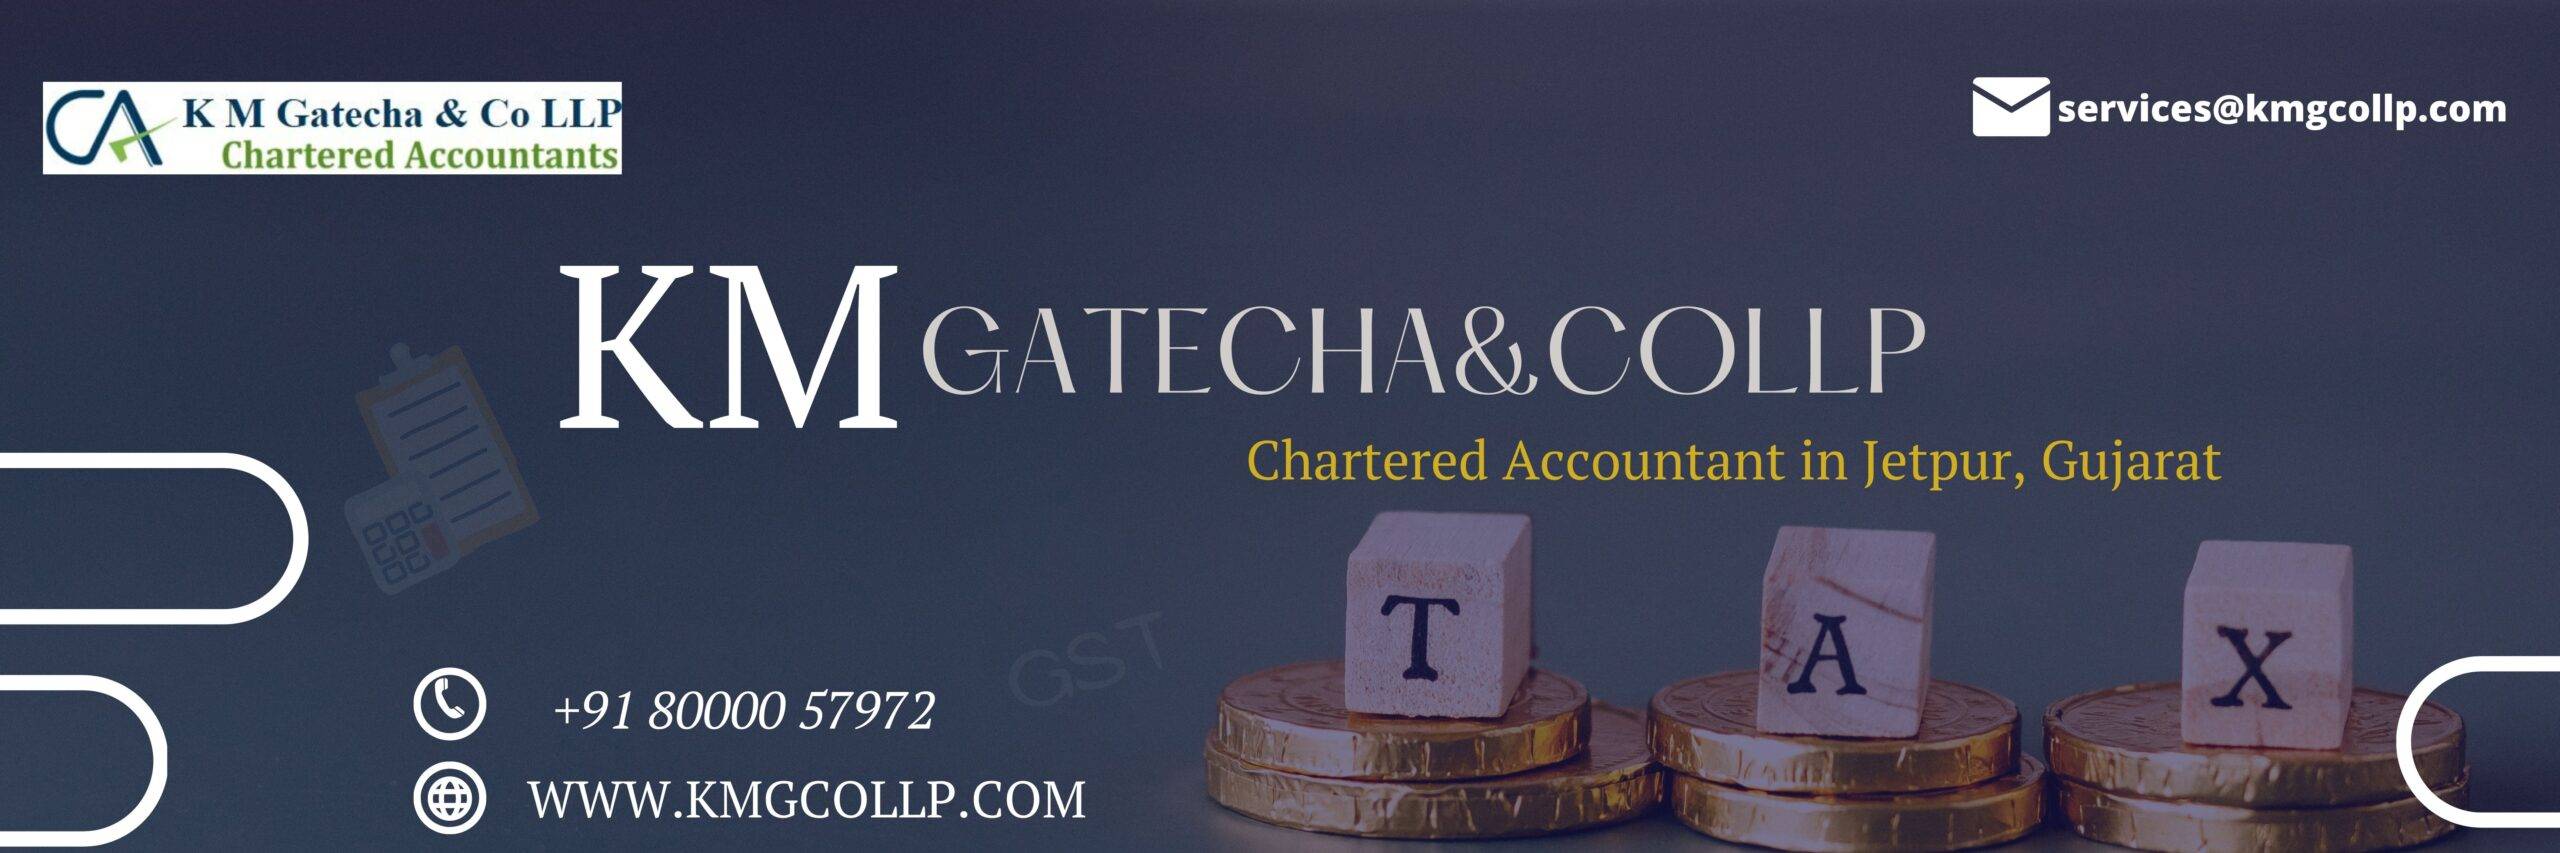 ca chartered accountant in Jetpur